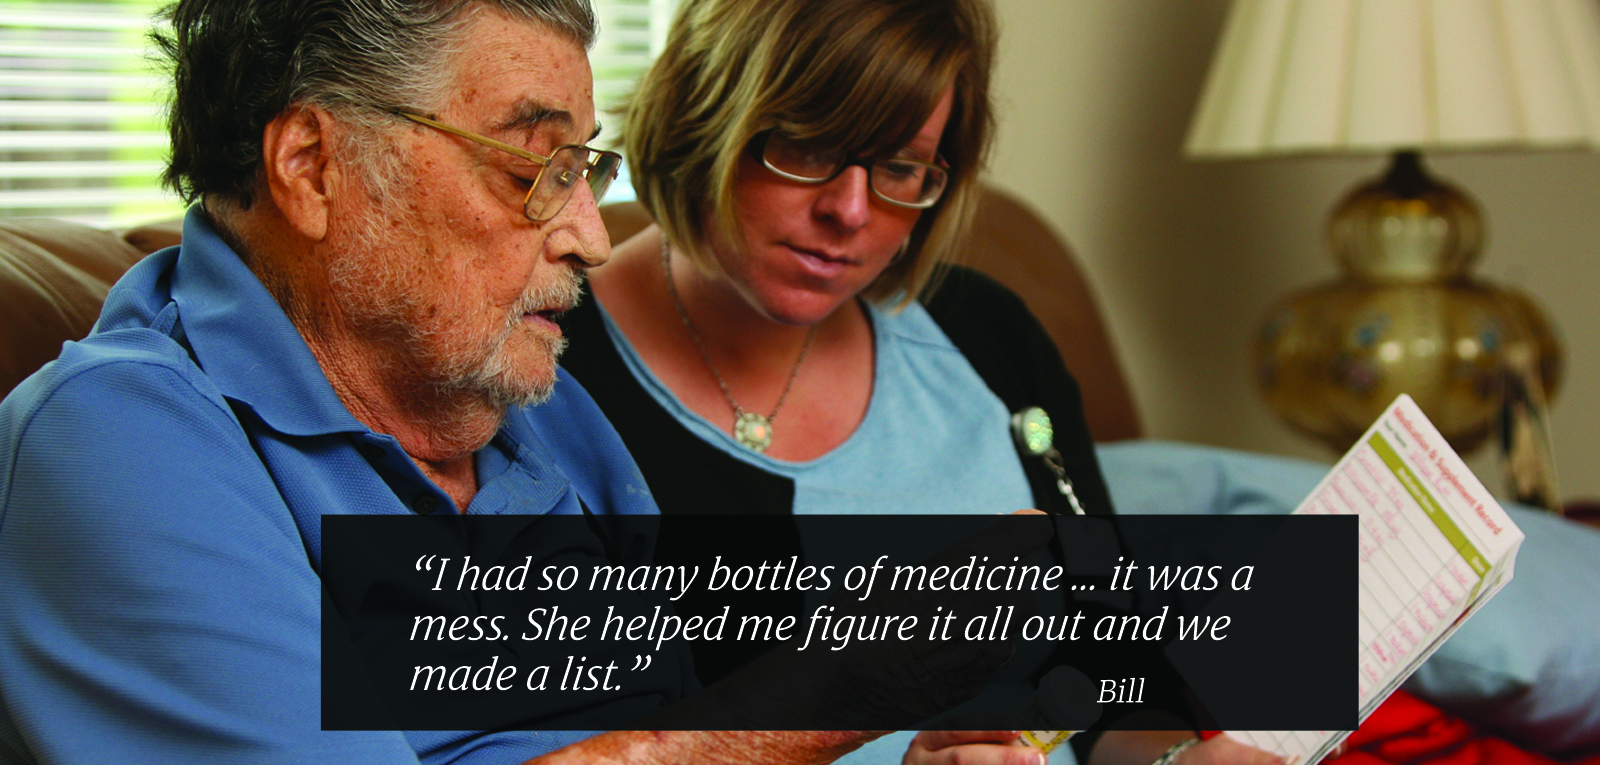 I had so many bottles of medicine... it was a mess. She helped me figure it all out and we made a list. Bill